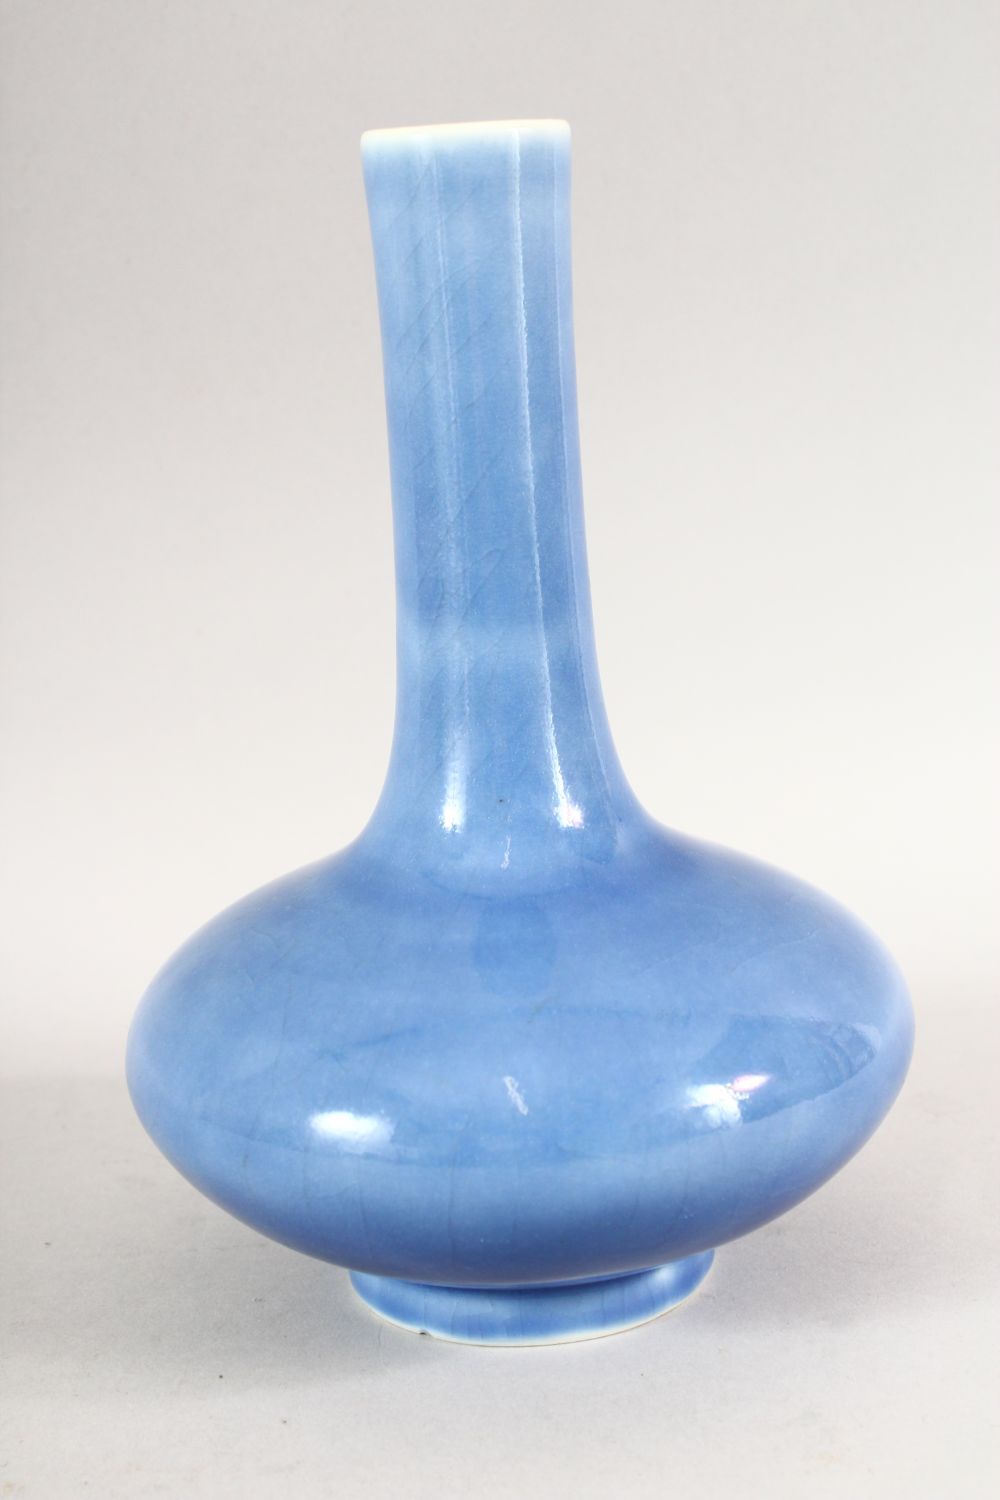 A GOOD BLUE GLAZE BULBOUS VASE, six character mark to base in blue, 22cm high. - Image 3 of 6